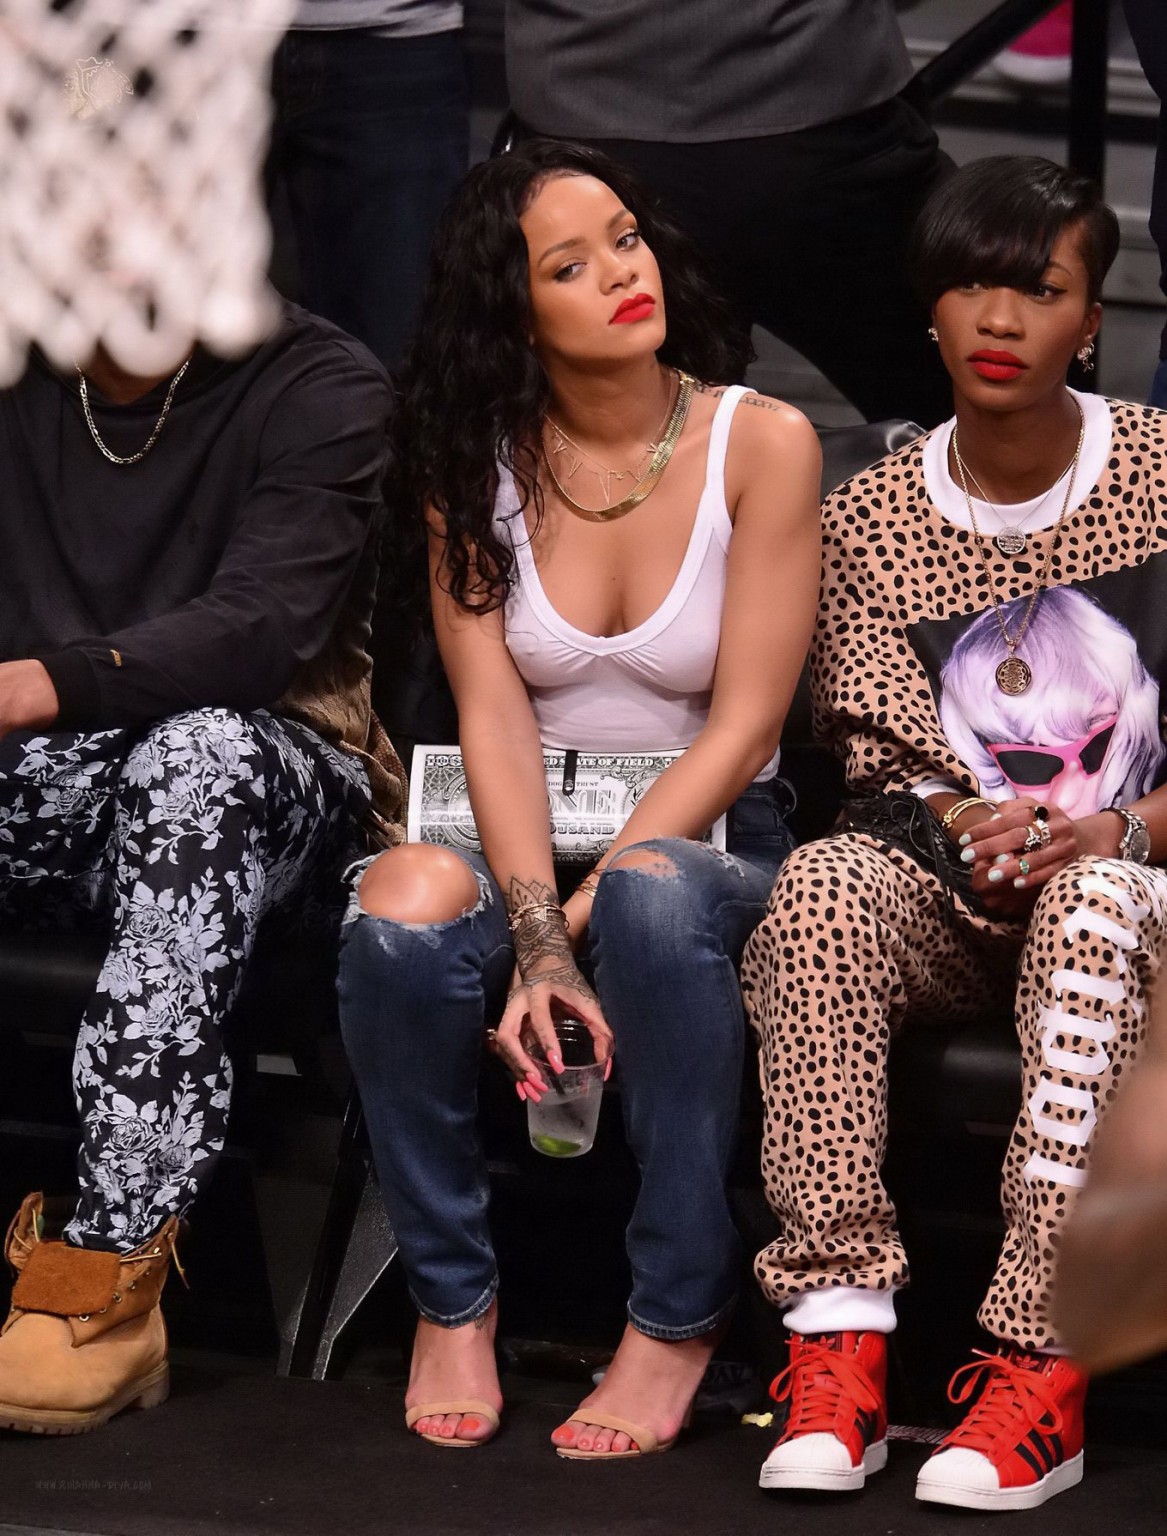 Rihanna shows off her boobs in seethru top at a basketball game in NYC #75198000